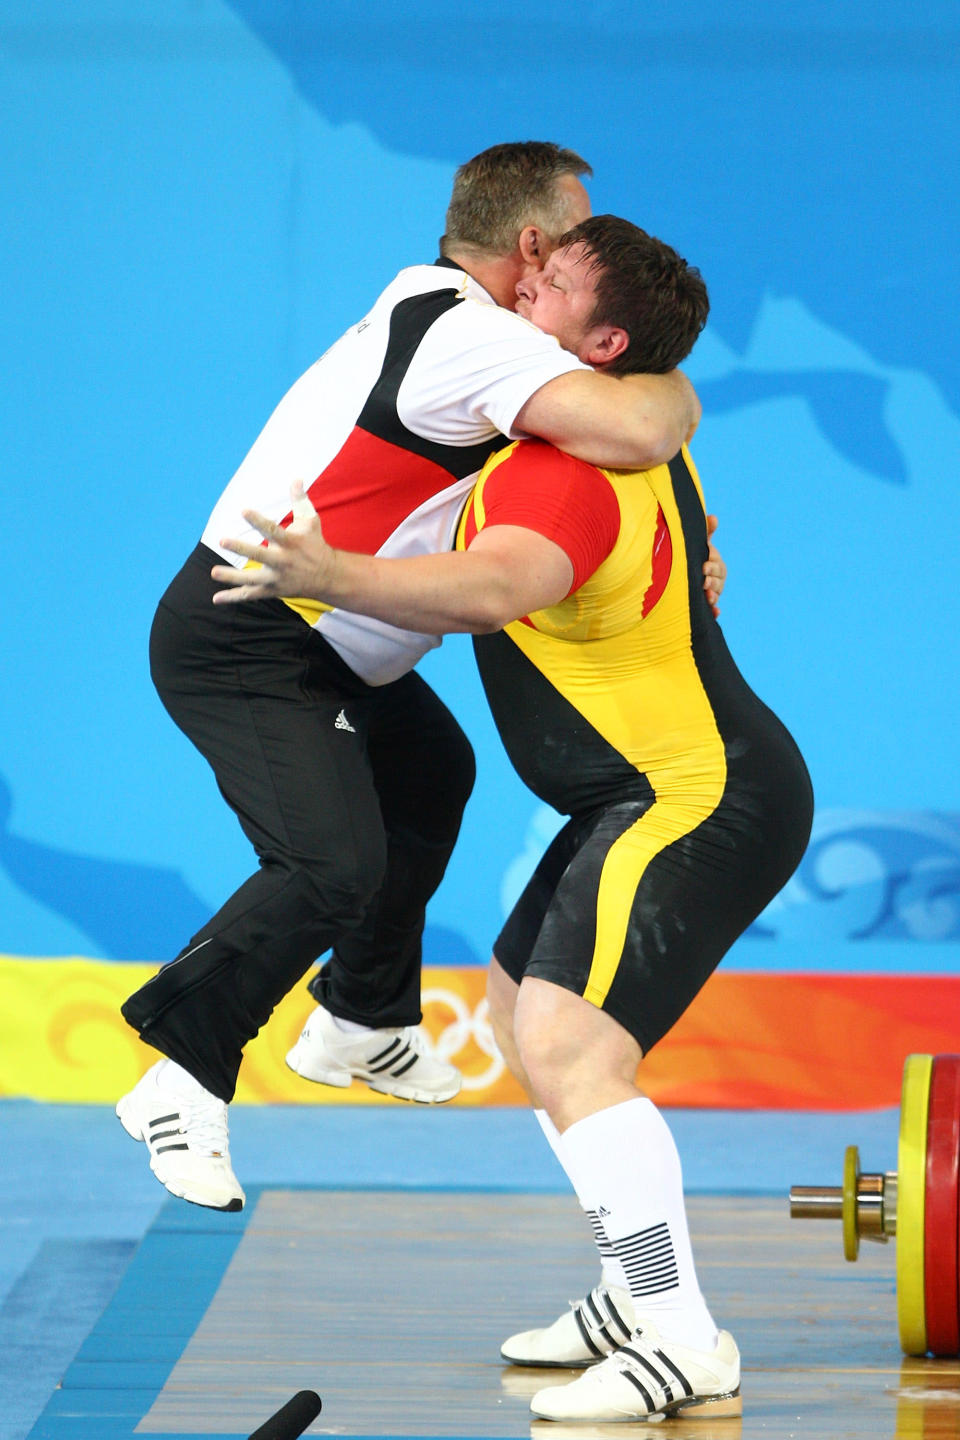 BEIJING - AUGUST 19: Matthias Steiner of Germany celebrates winning the gold medal in the Men's 105 kg group weightlifting event with his coach Frank Mantek at the Beijing University of Aeronautics & Astronautics Gymnasium on Day 11 of the Beijing 2008 Olympic Games on August 19, 2008 in Beijing, China. (Photo by Julian Finney/Getty Images)